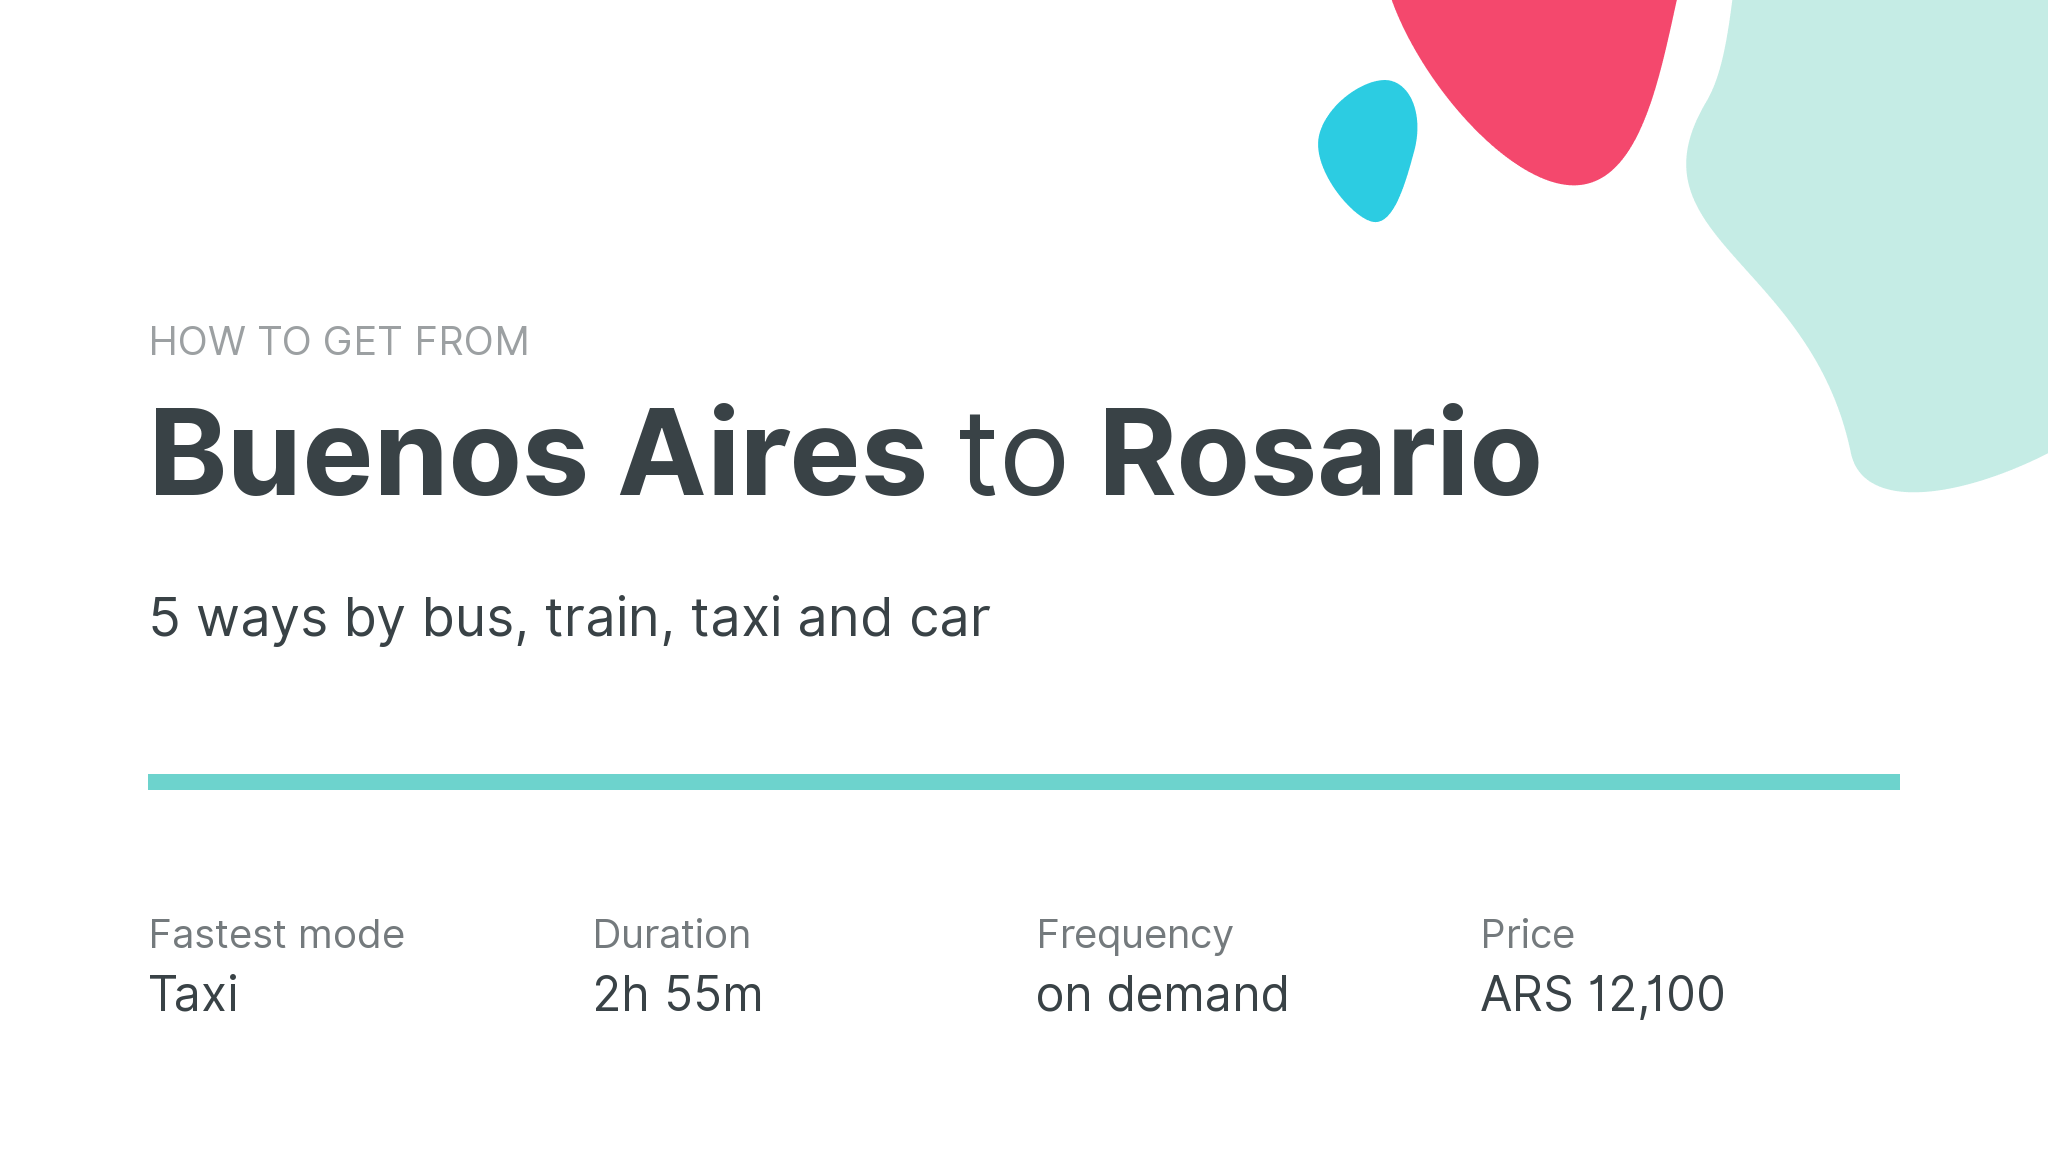 How do I get from Buenos Aires to Rosario